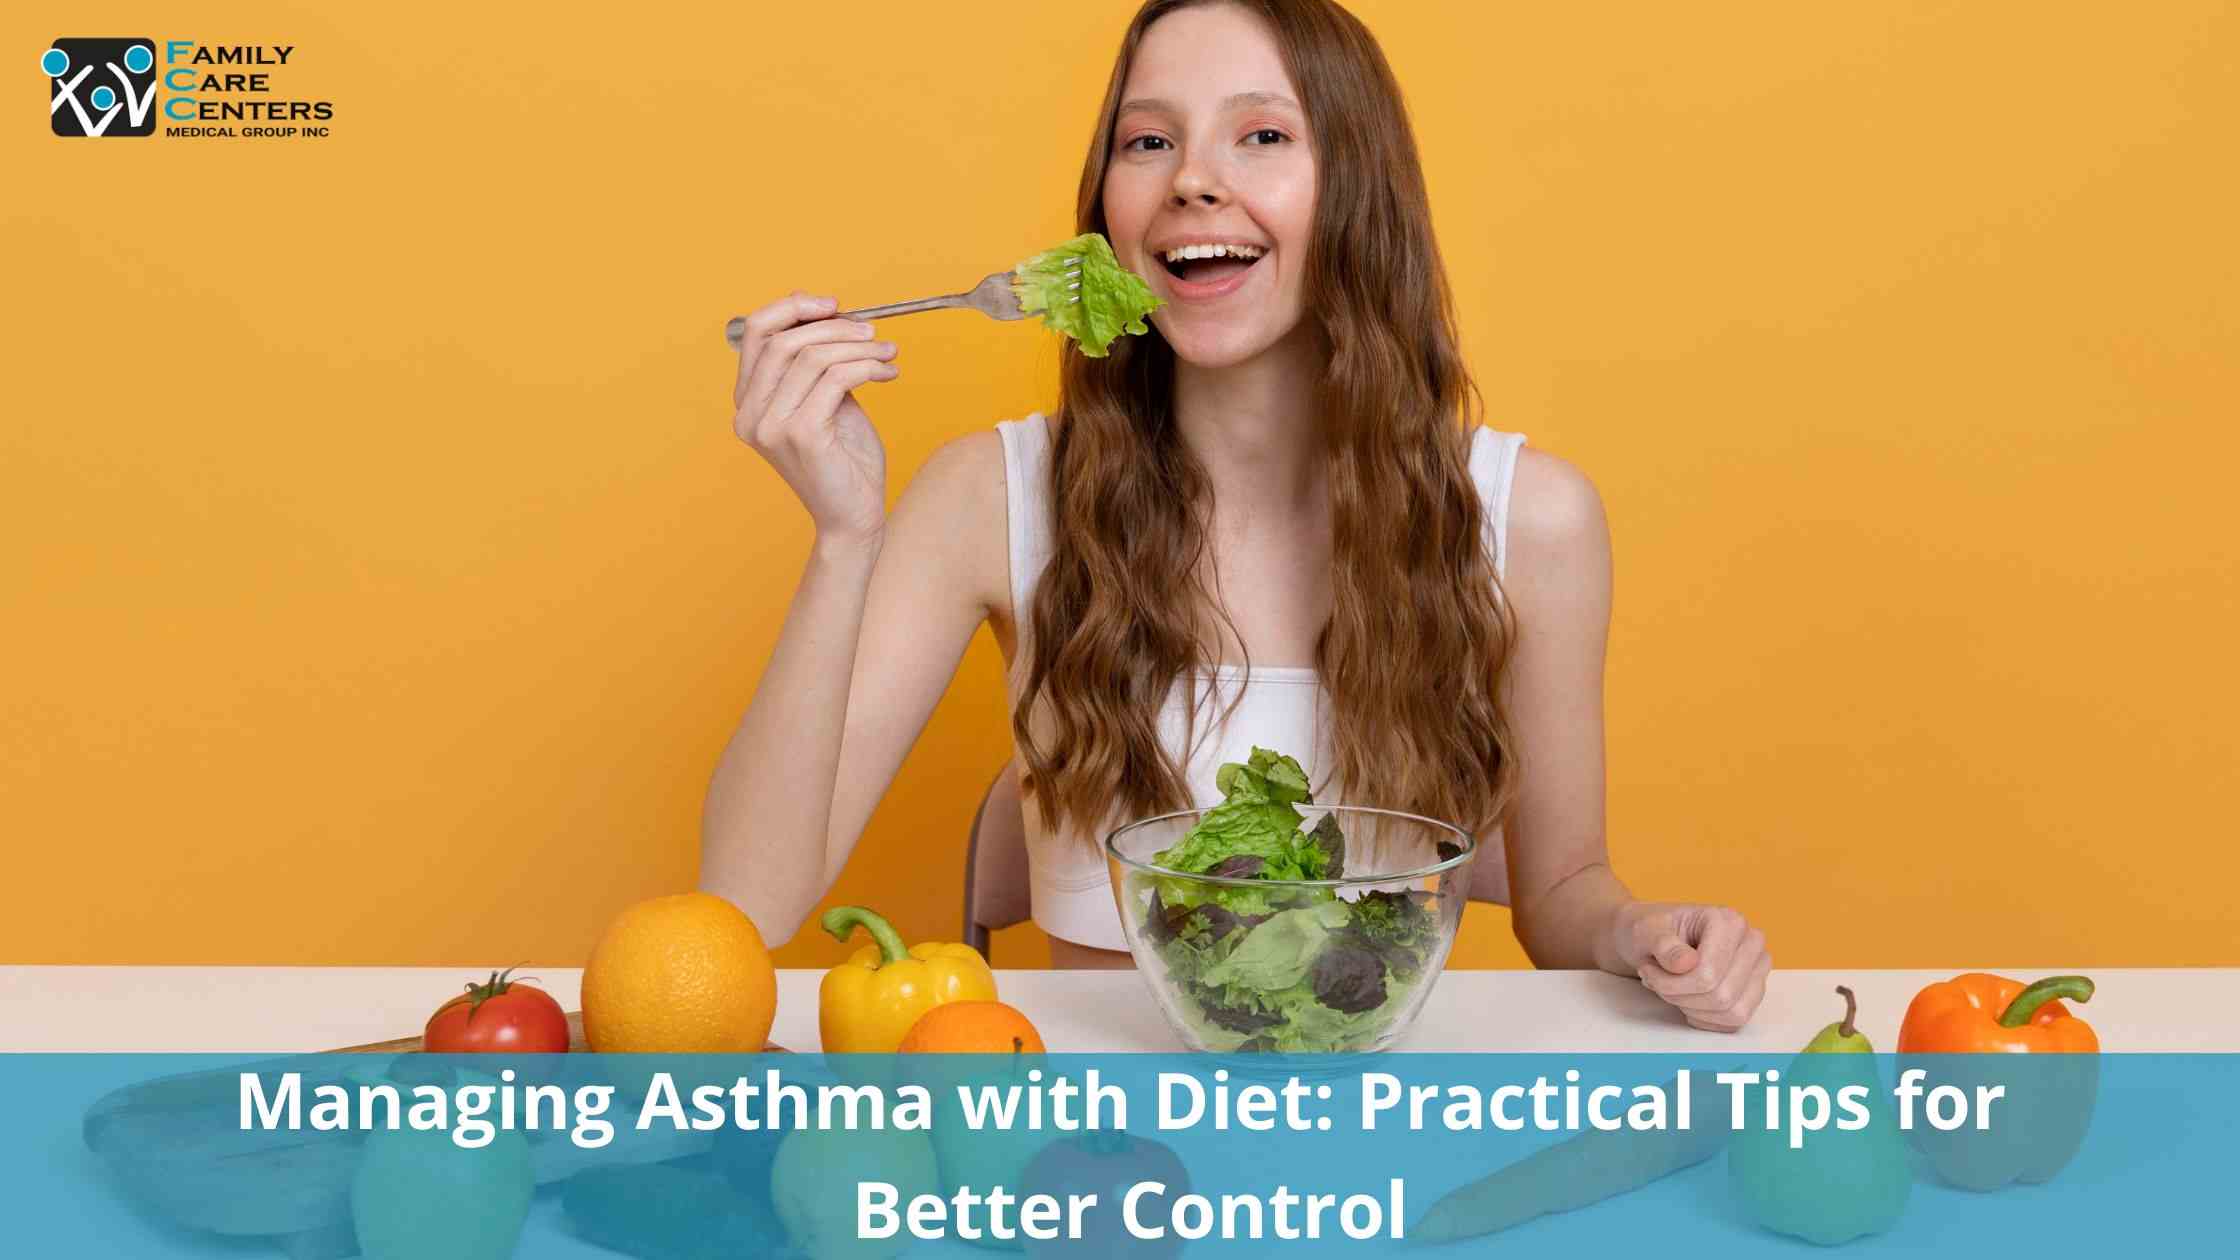 Managing Asthma with Diet: Practical Tips for Better Control